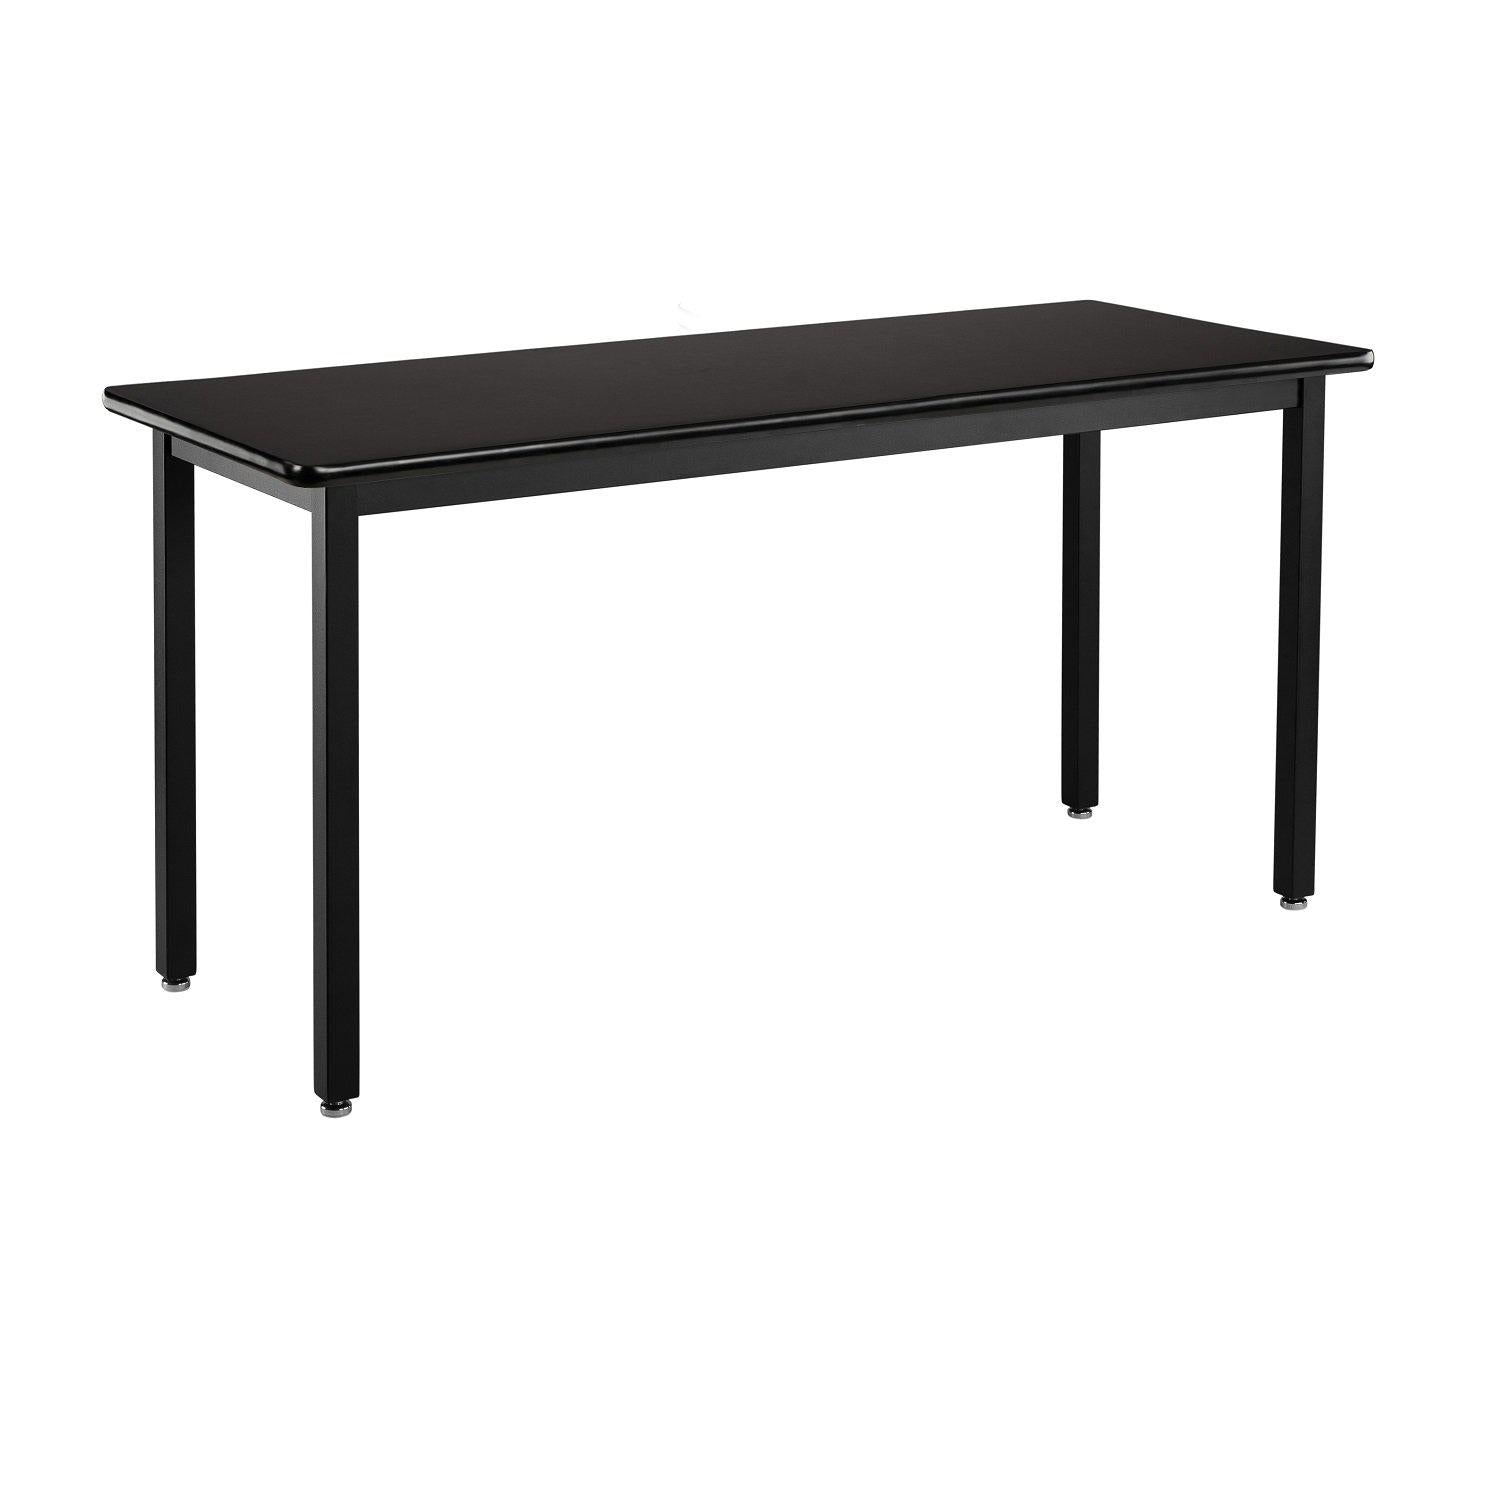 Heavy-Duty Fixed Height Utility Table, Black Frame, 24" x 48", High-Pressure Laminate Top with T-Mold Edge